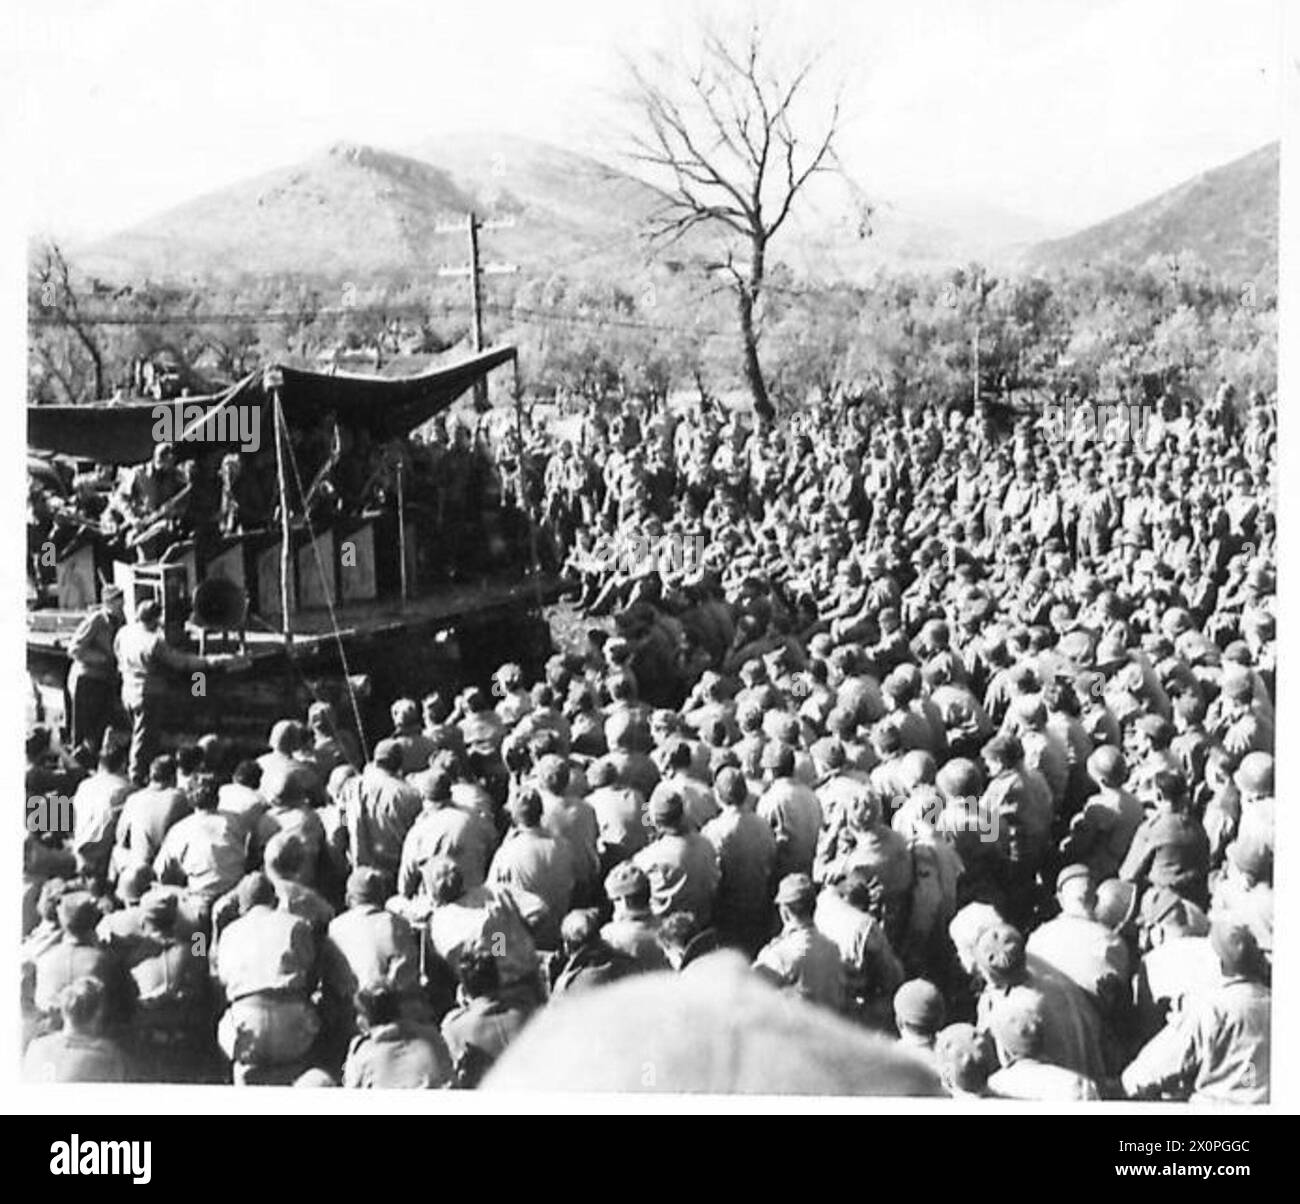 THE BRITISH ARMY IN NORTH AFRICA, SICILY, ITALY, THE BALKANS AND AUSTRIA 1942-1946 - The rain has stopped, the sun it out, the bivouacs are empty. Where are the men? Here they are seated on a sunlit hill, listening to a frontline concert party band in the Cassino area. Photographic negative , British Army Stock Photo